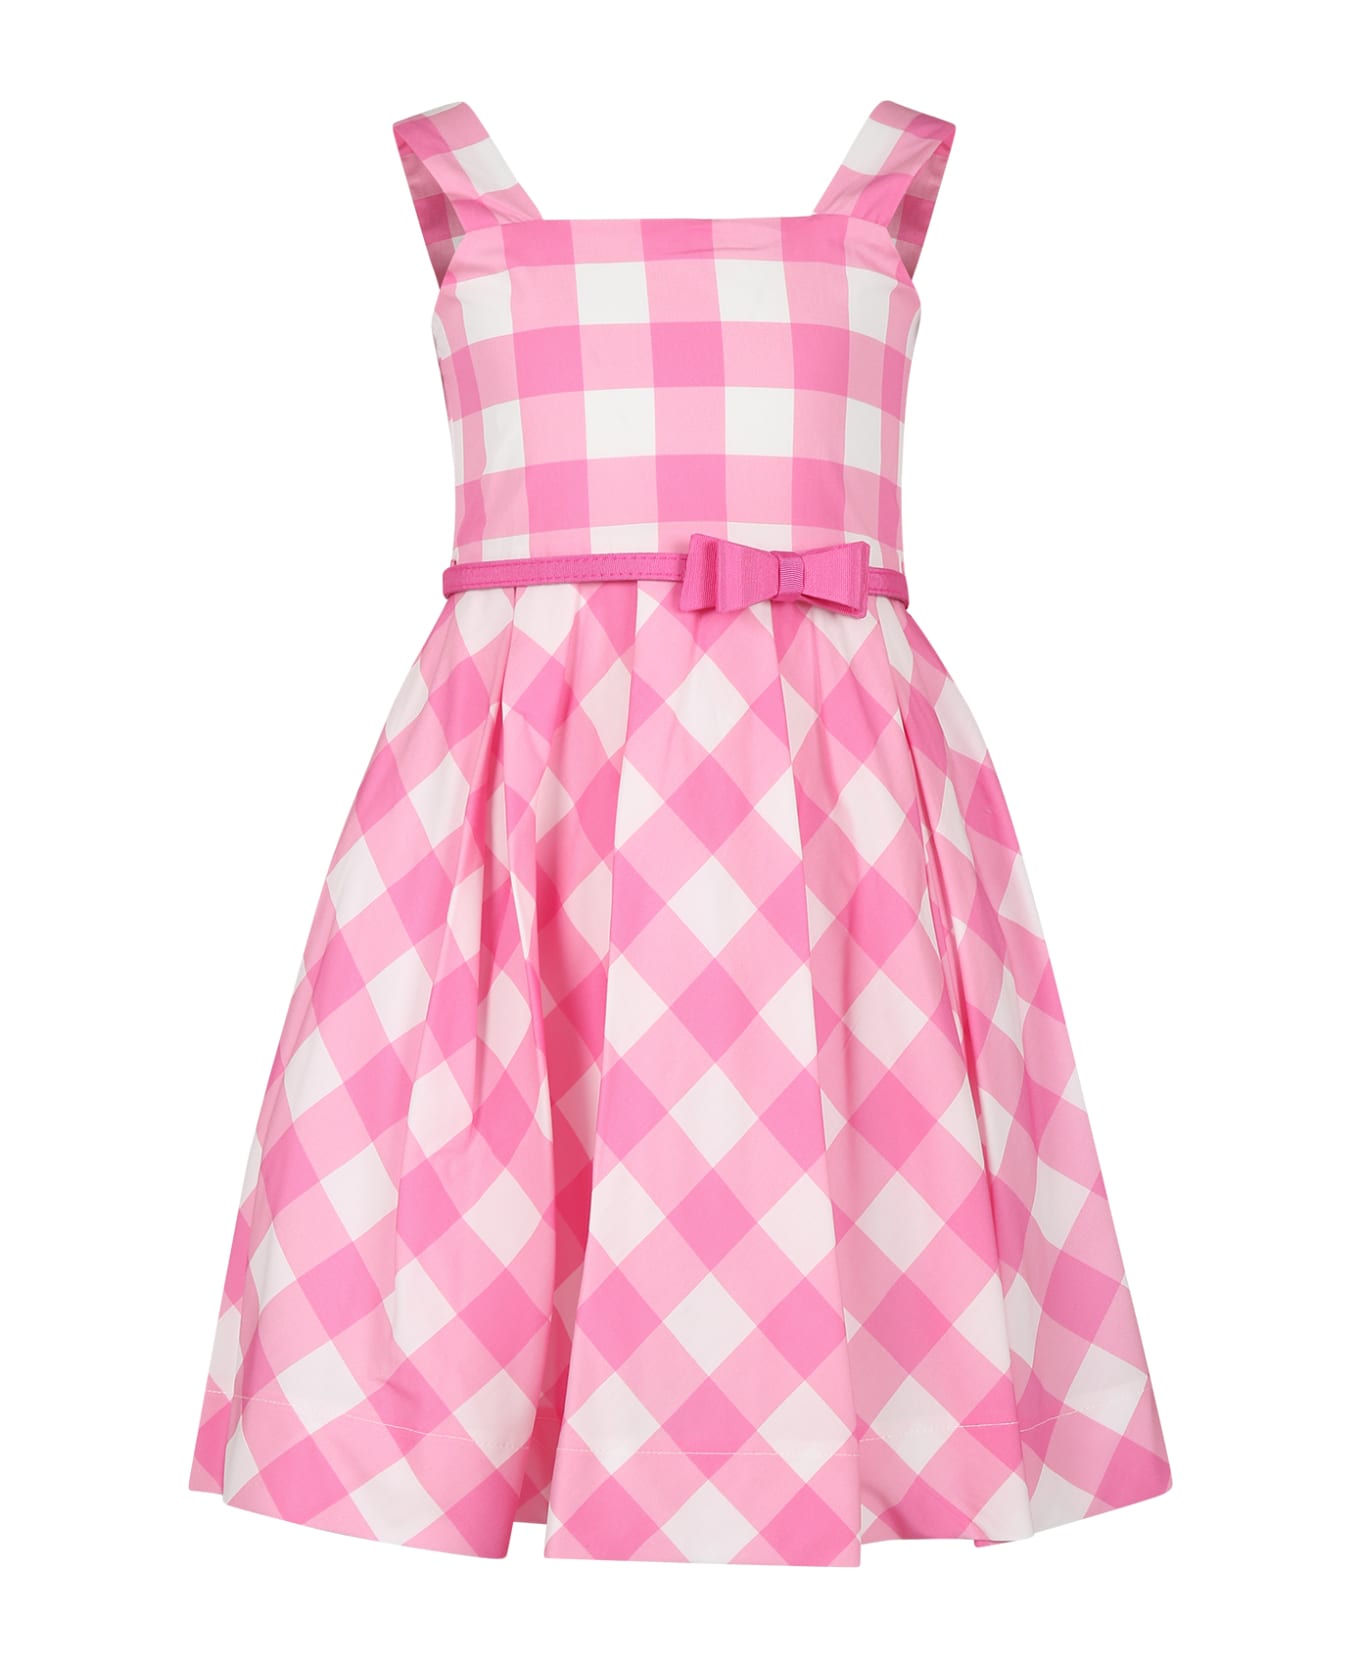 Monnalisa Pink Dress For Girl With Bow And Vichy Print - Multicolor